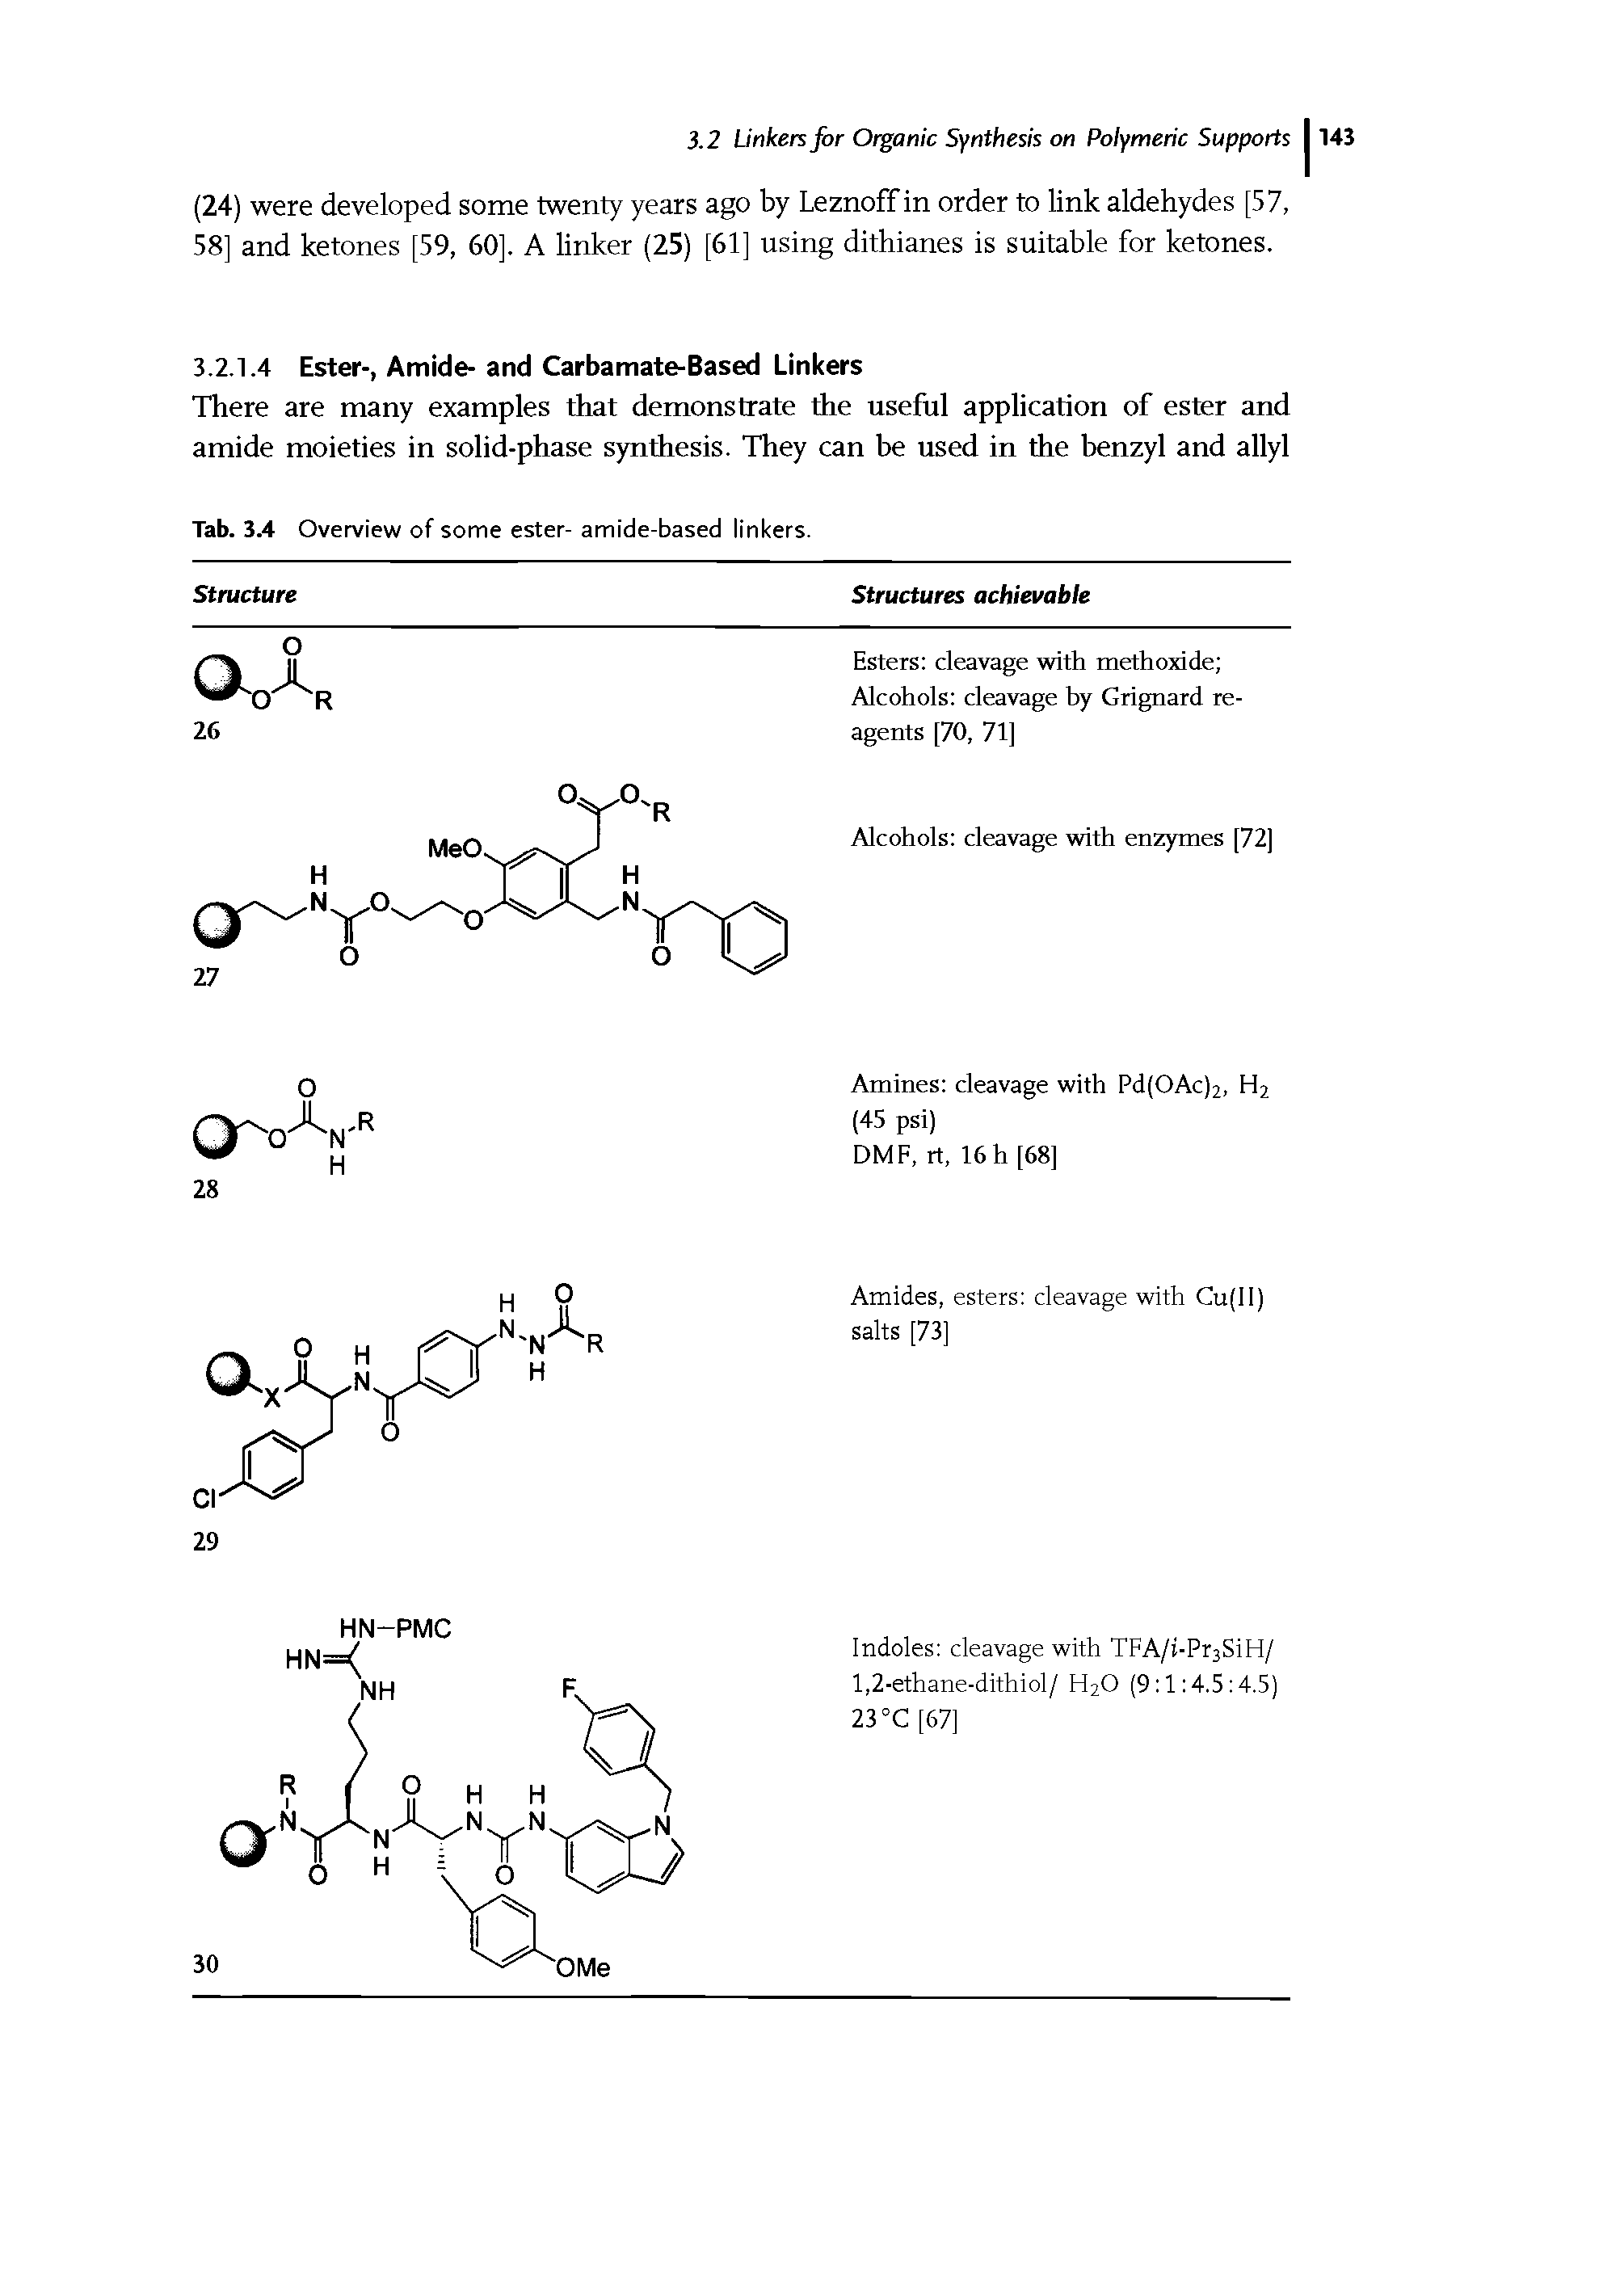 Tab. 3.4 Overview of some ester- amide-based linkers.